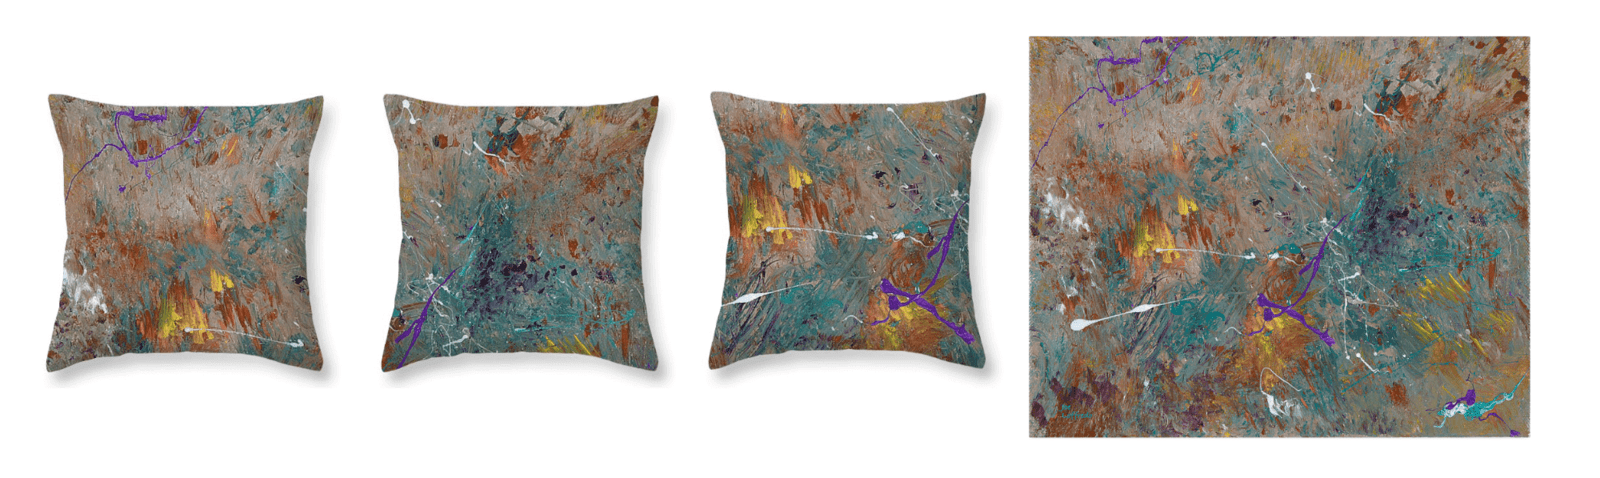 Throw pillows with Abstract Art patterns 